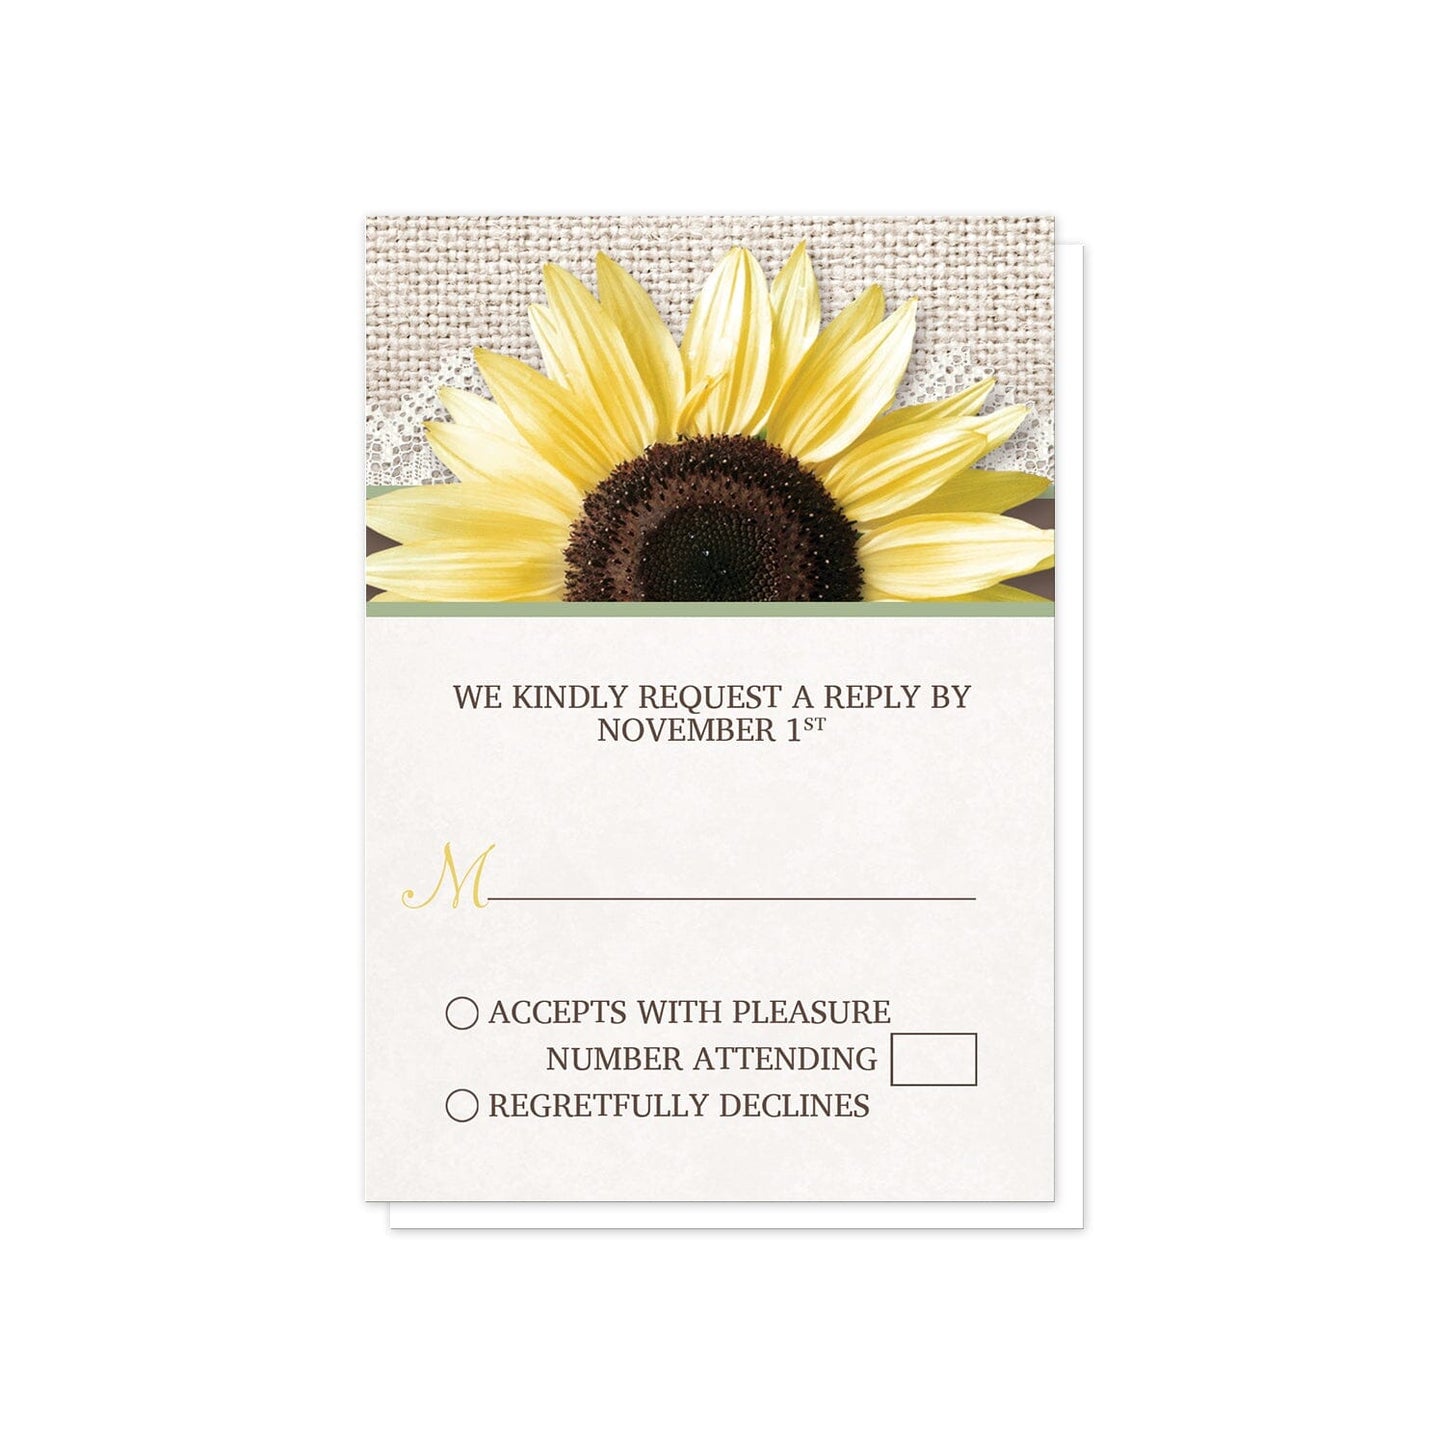 Burlap Lace Brown Sage Sunflower RSVP Cards at Artistically Invited.